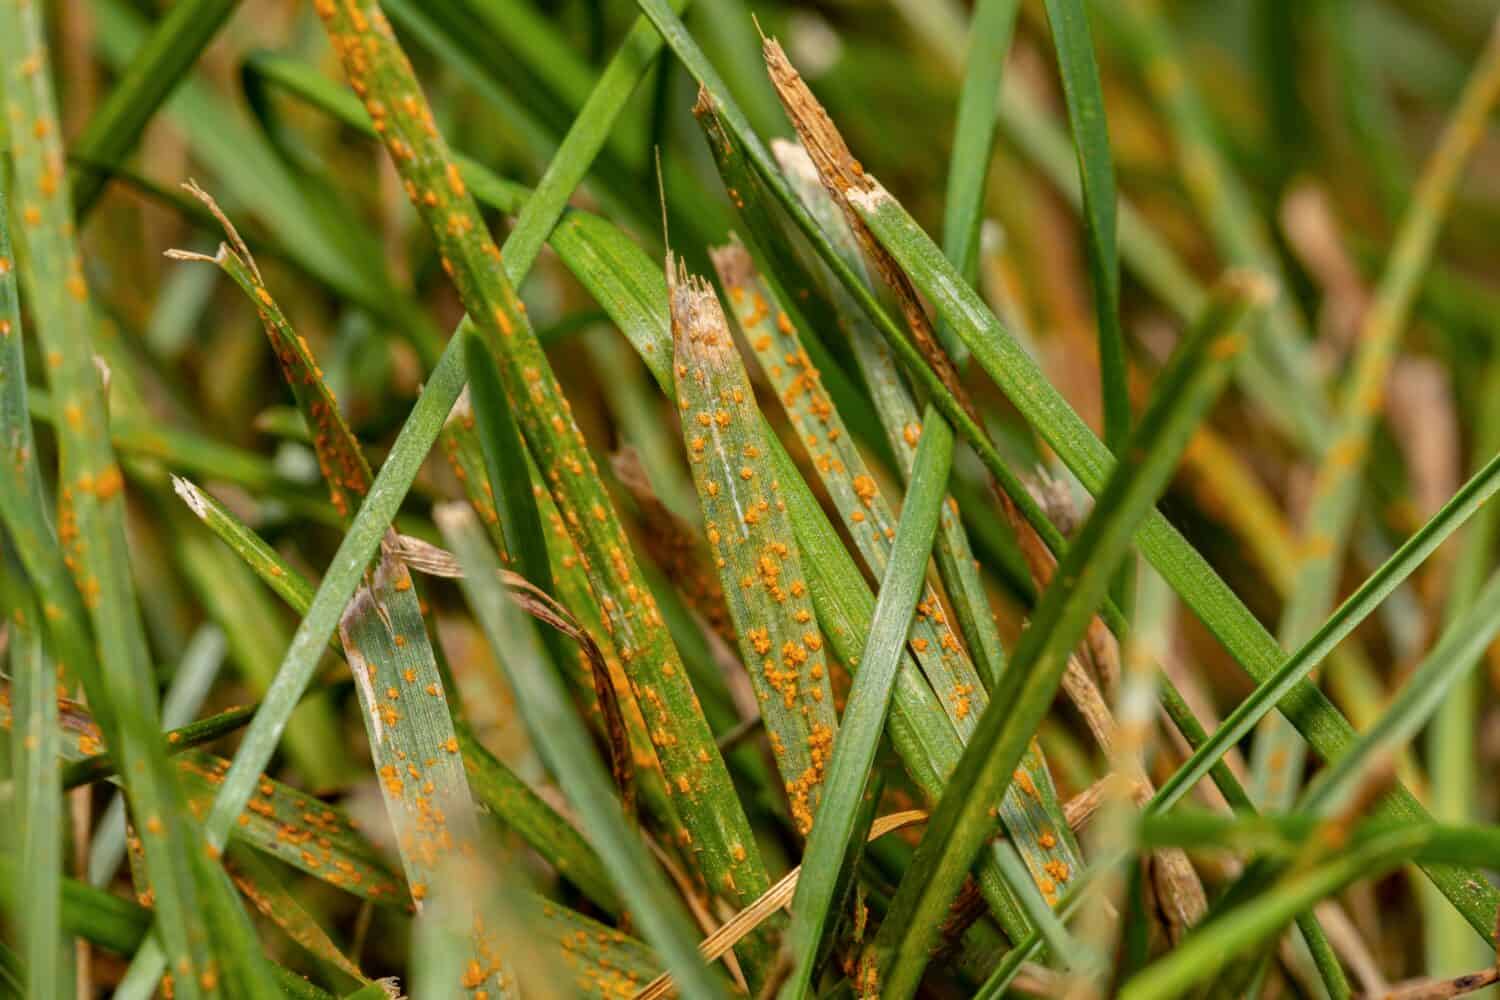 Grass rust fungus in yard. Lawn disease, prevention and lawncare service concept.